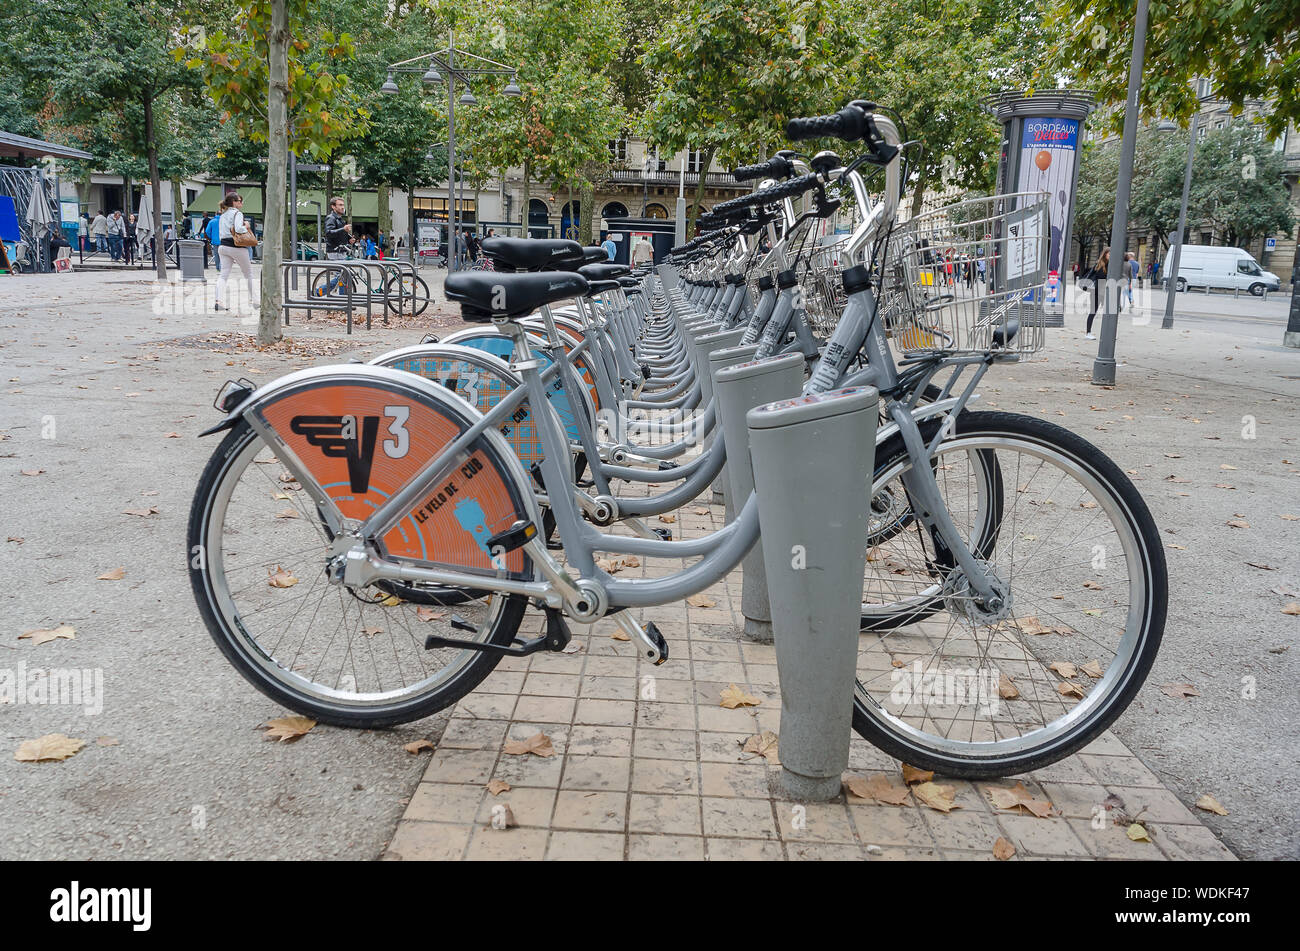 Bicycle rental stand in Bordeaux, France, in September 2013 Stock Photo